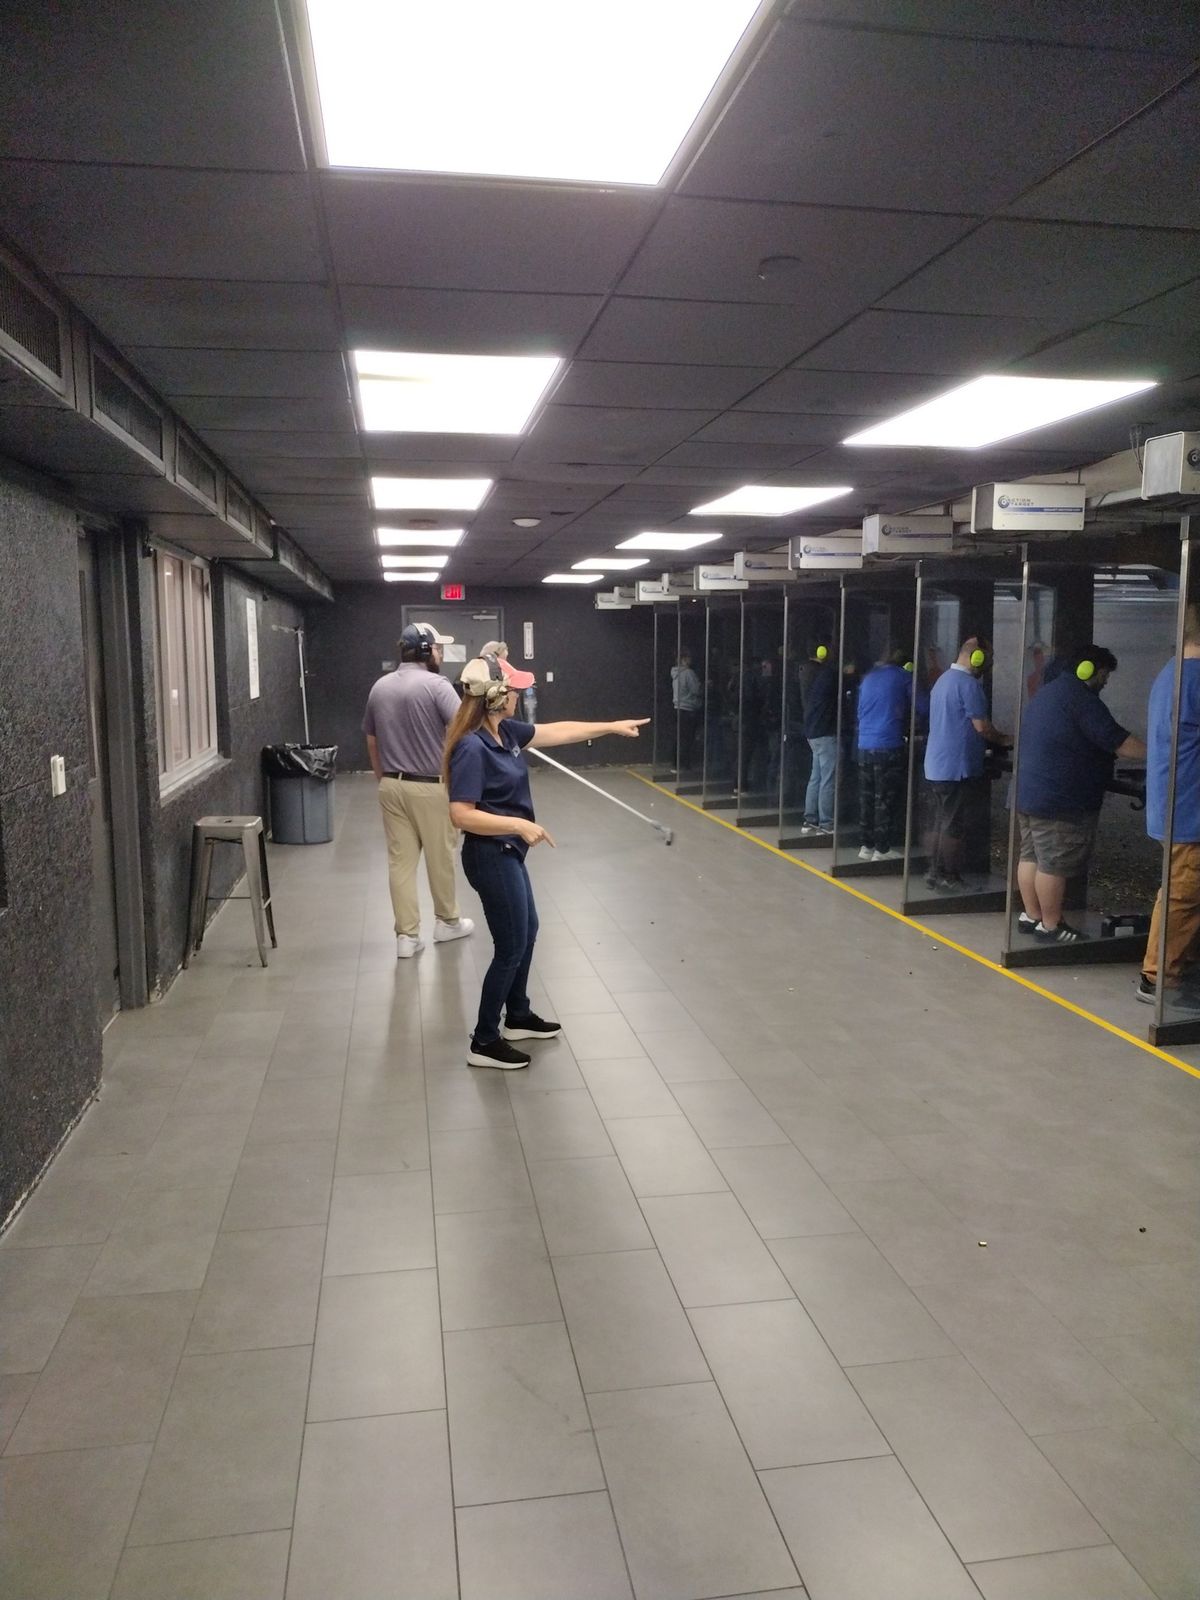 License to Carry Class $59 (DPS approved)